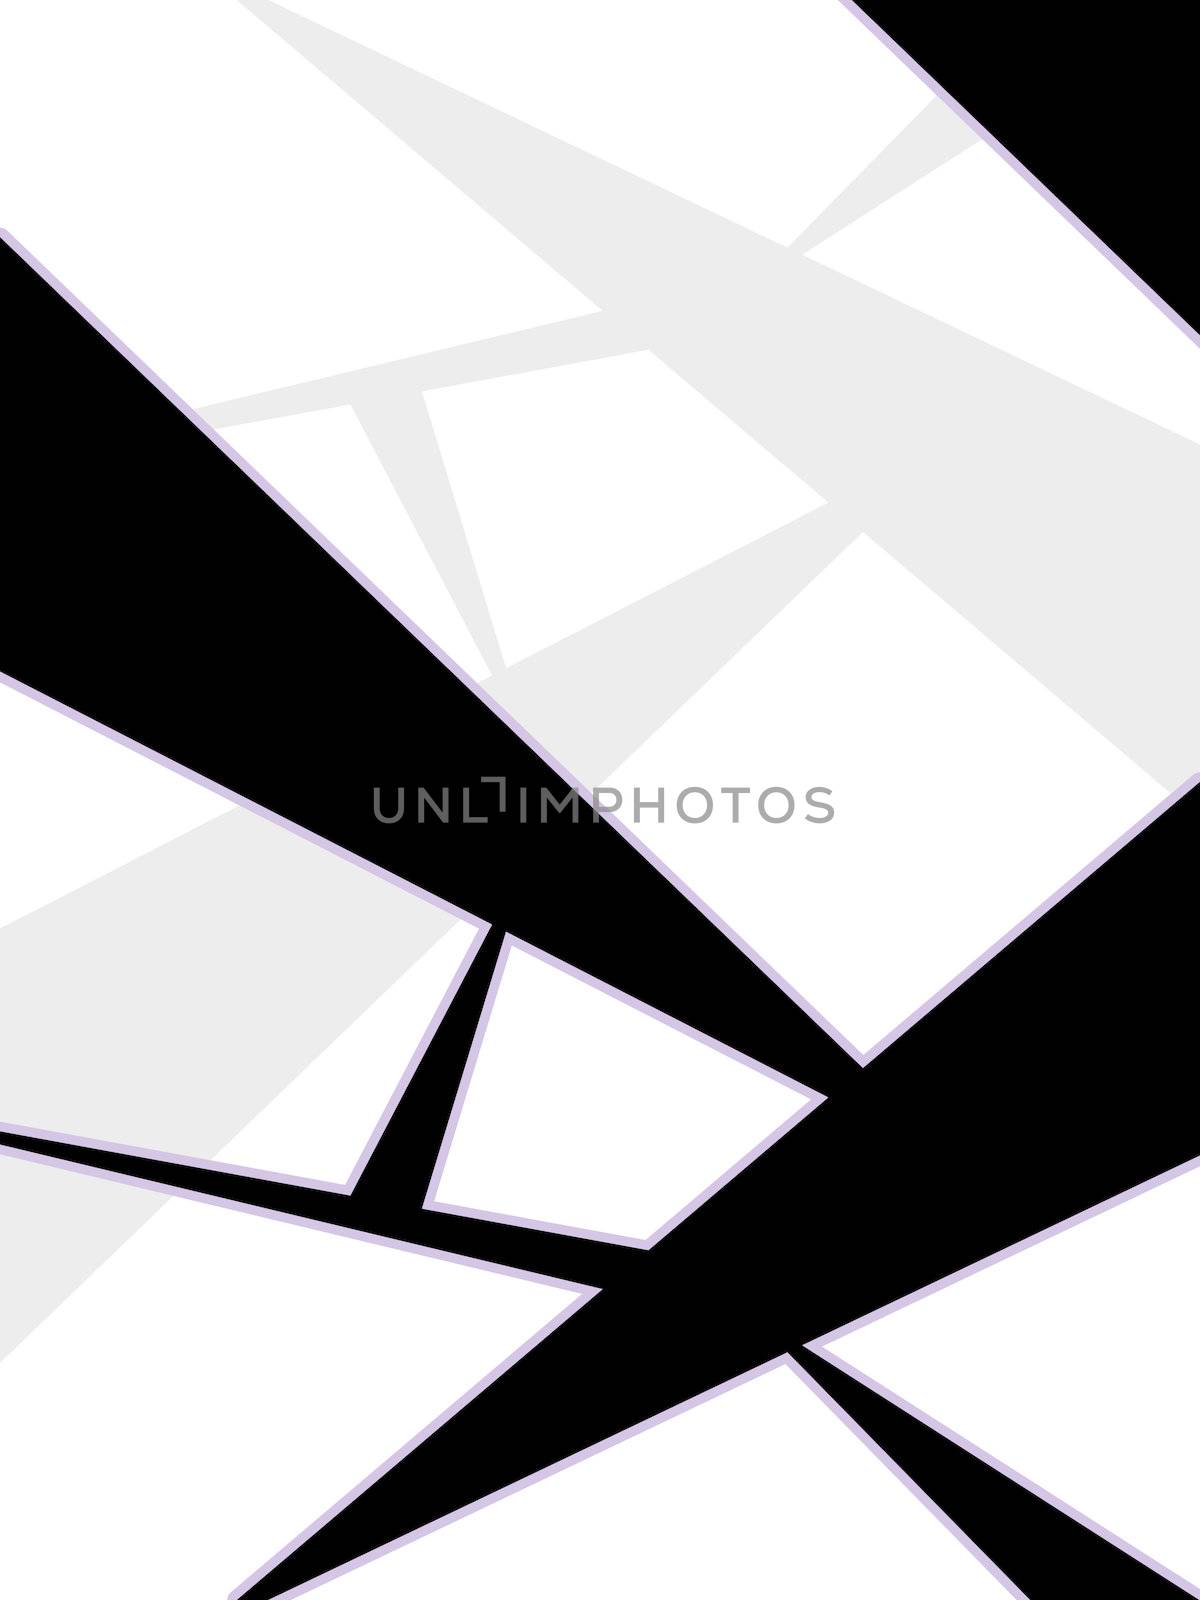 An abstract background with geometric shapes and plenty of copyspace.  This works great as a magazine ad page layout.  